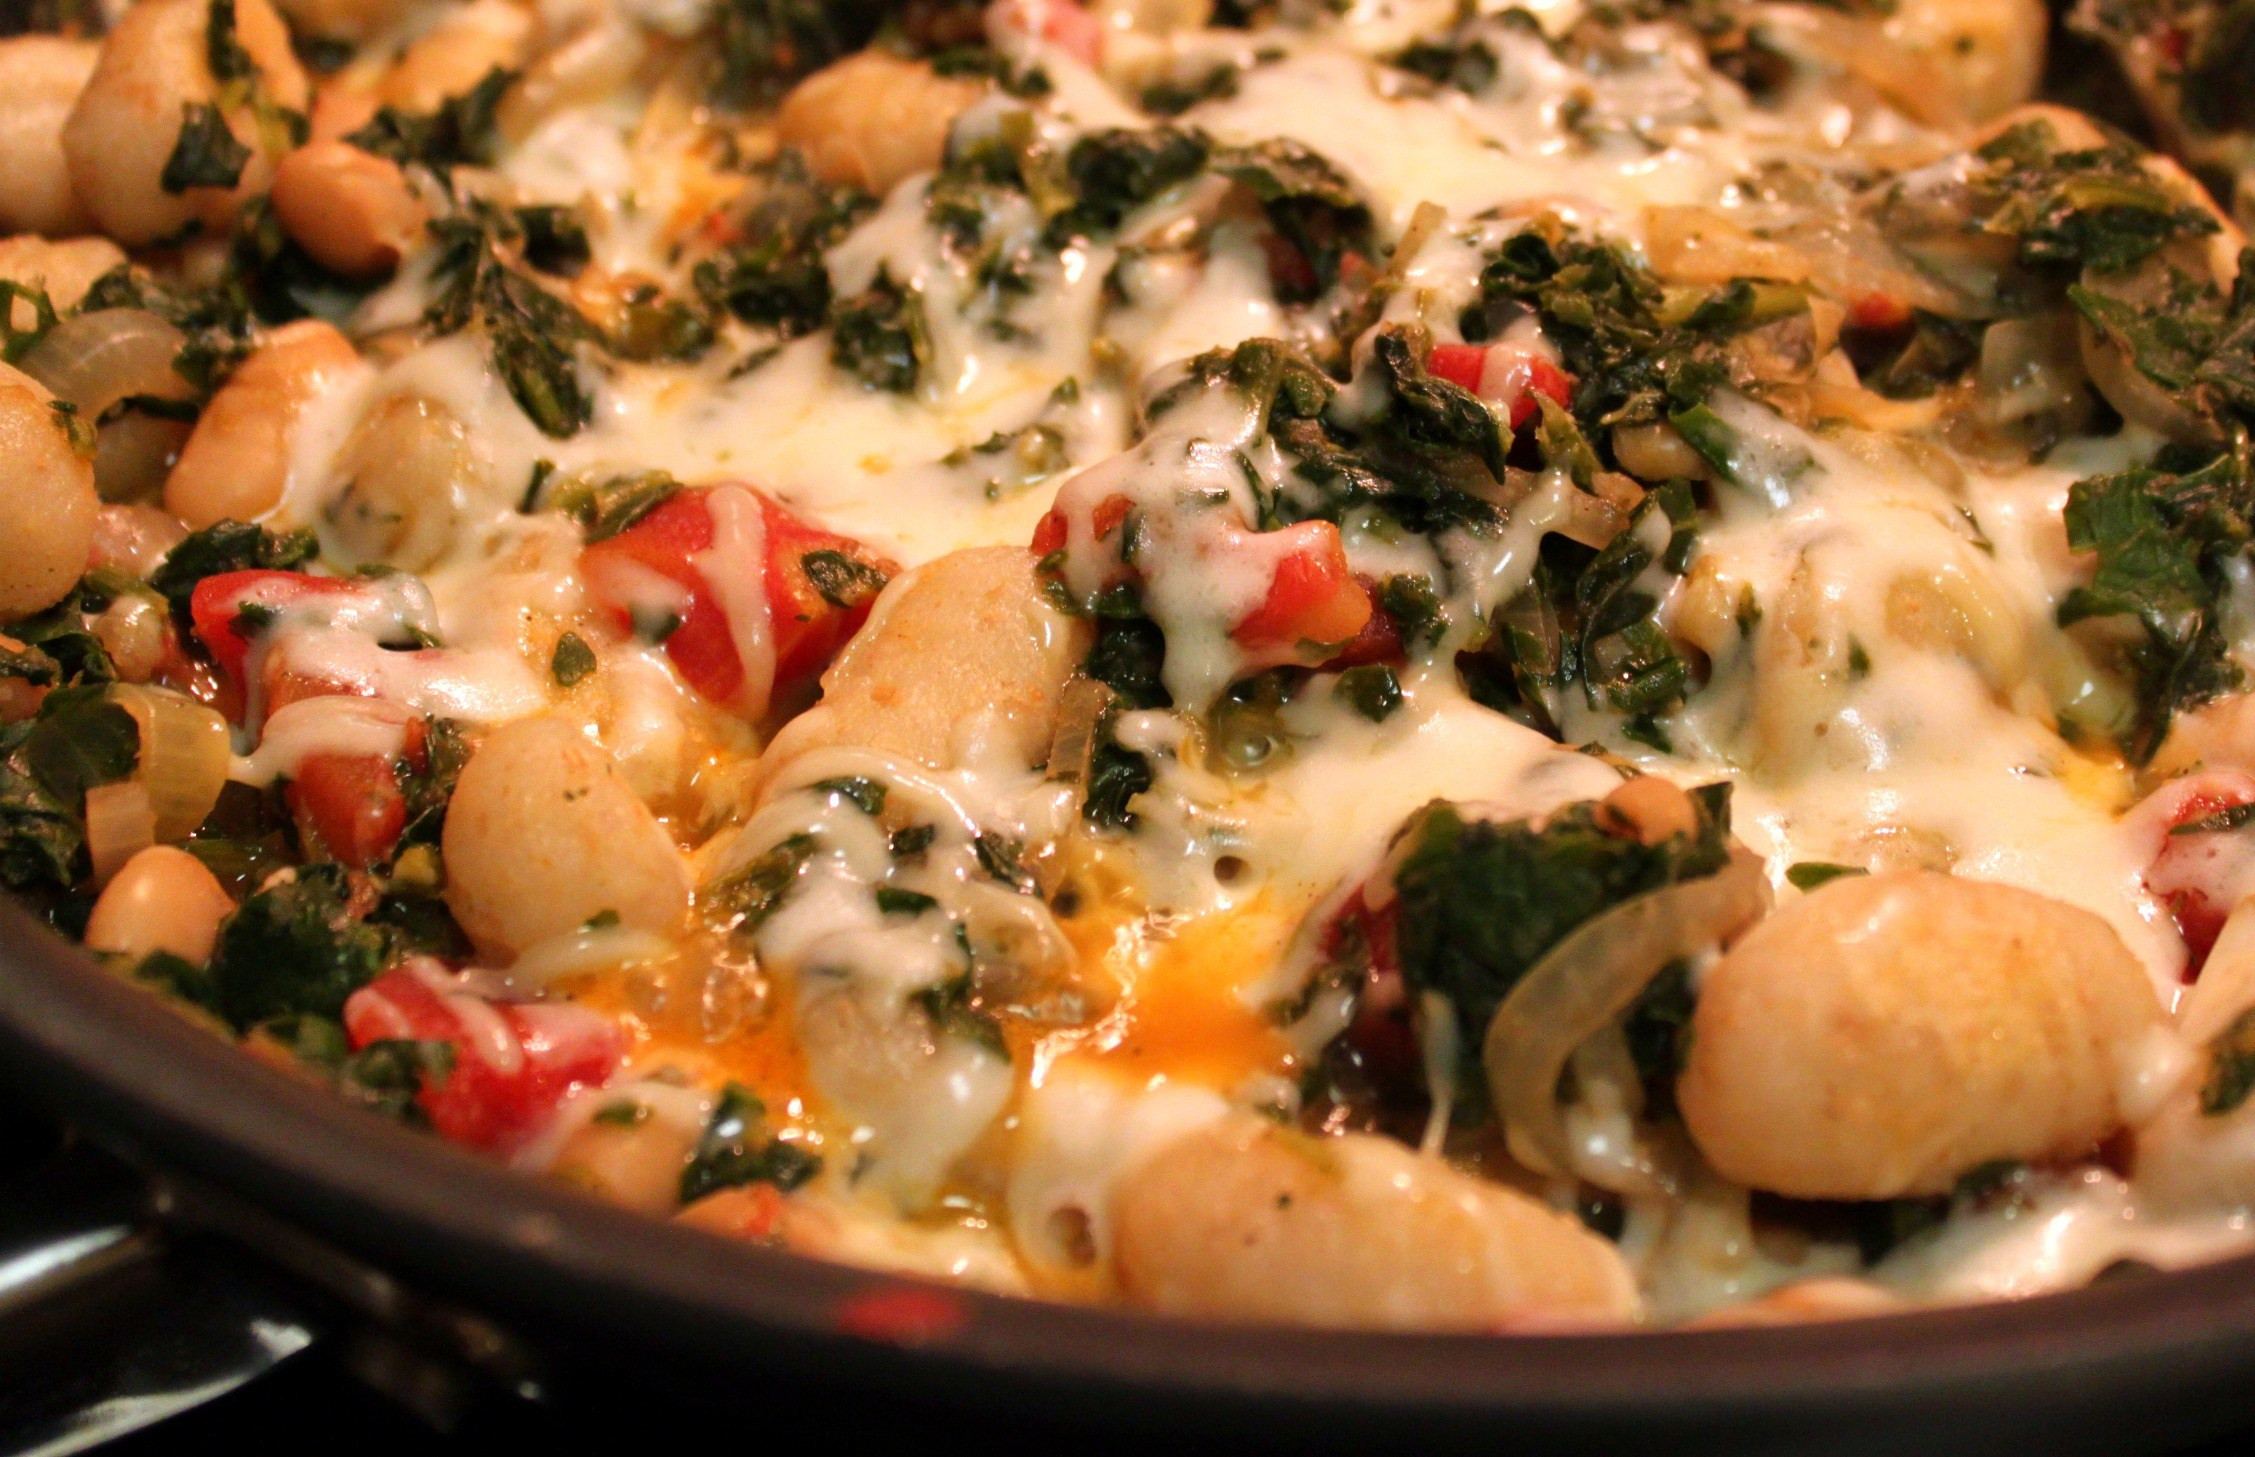 Healthy Winter Dinners
 A Warming Winter Dinner Skillet Gnocchi with Spinach and